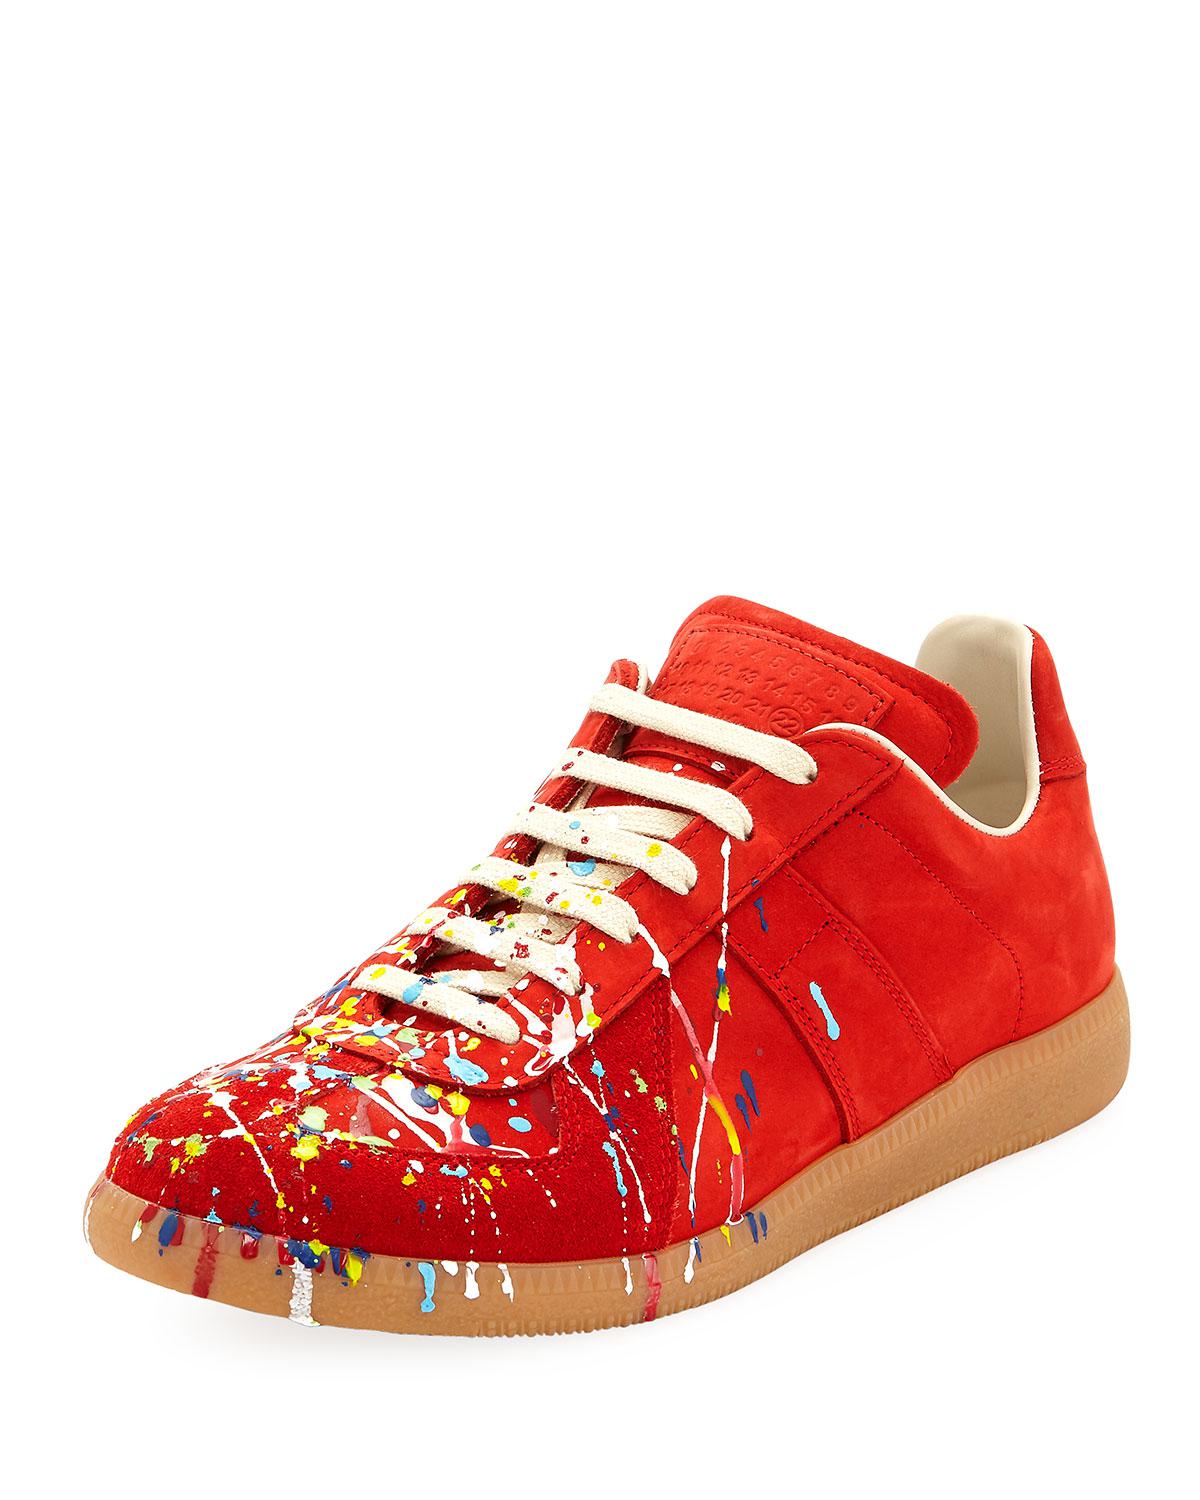 red margiela shoes